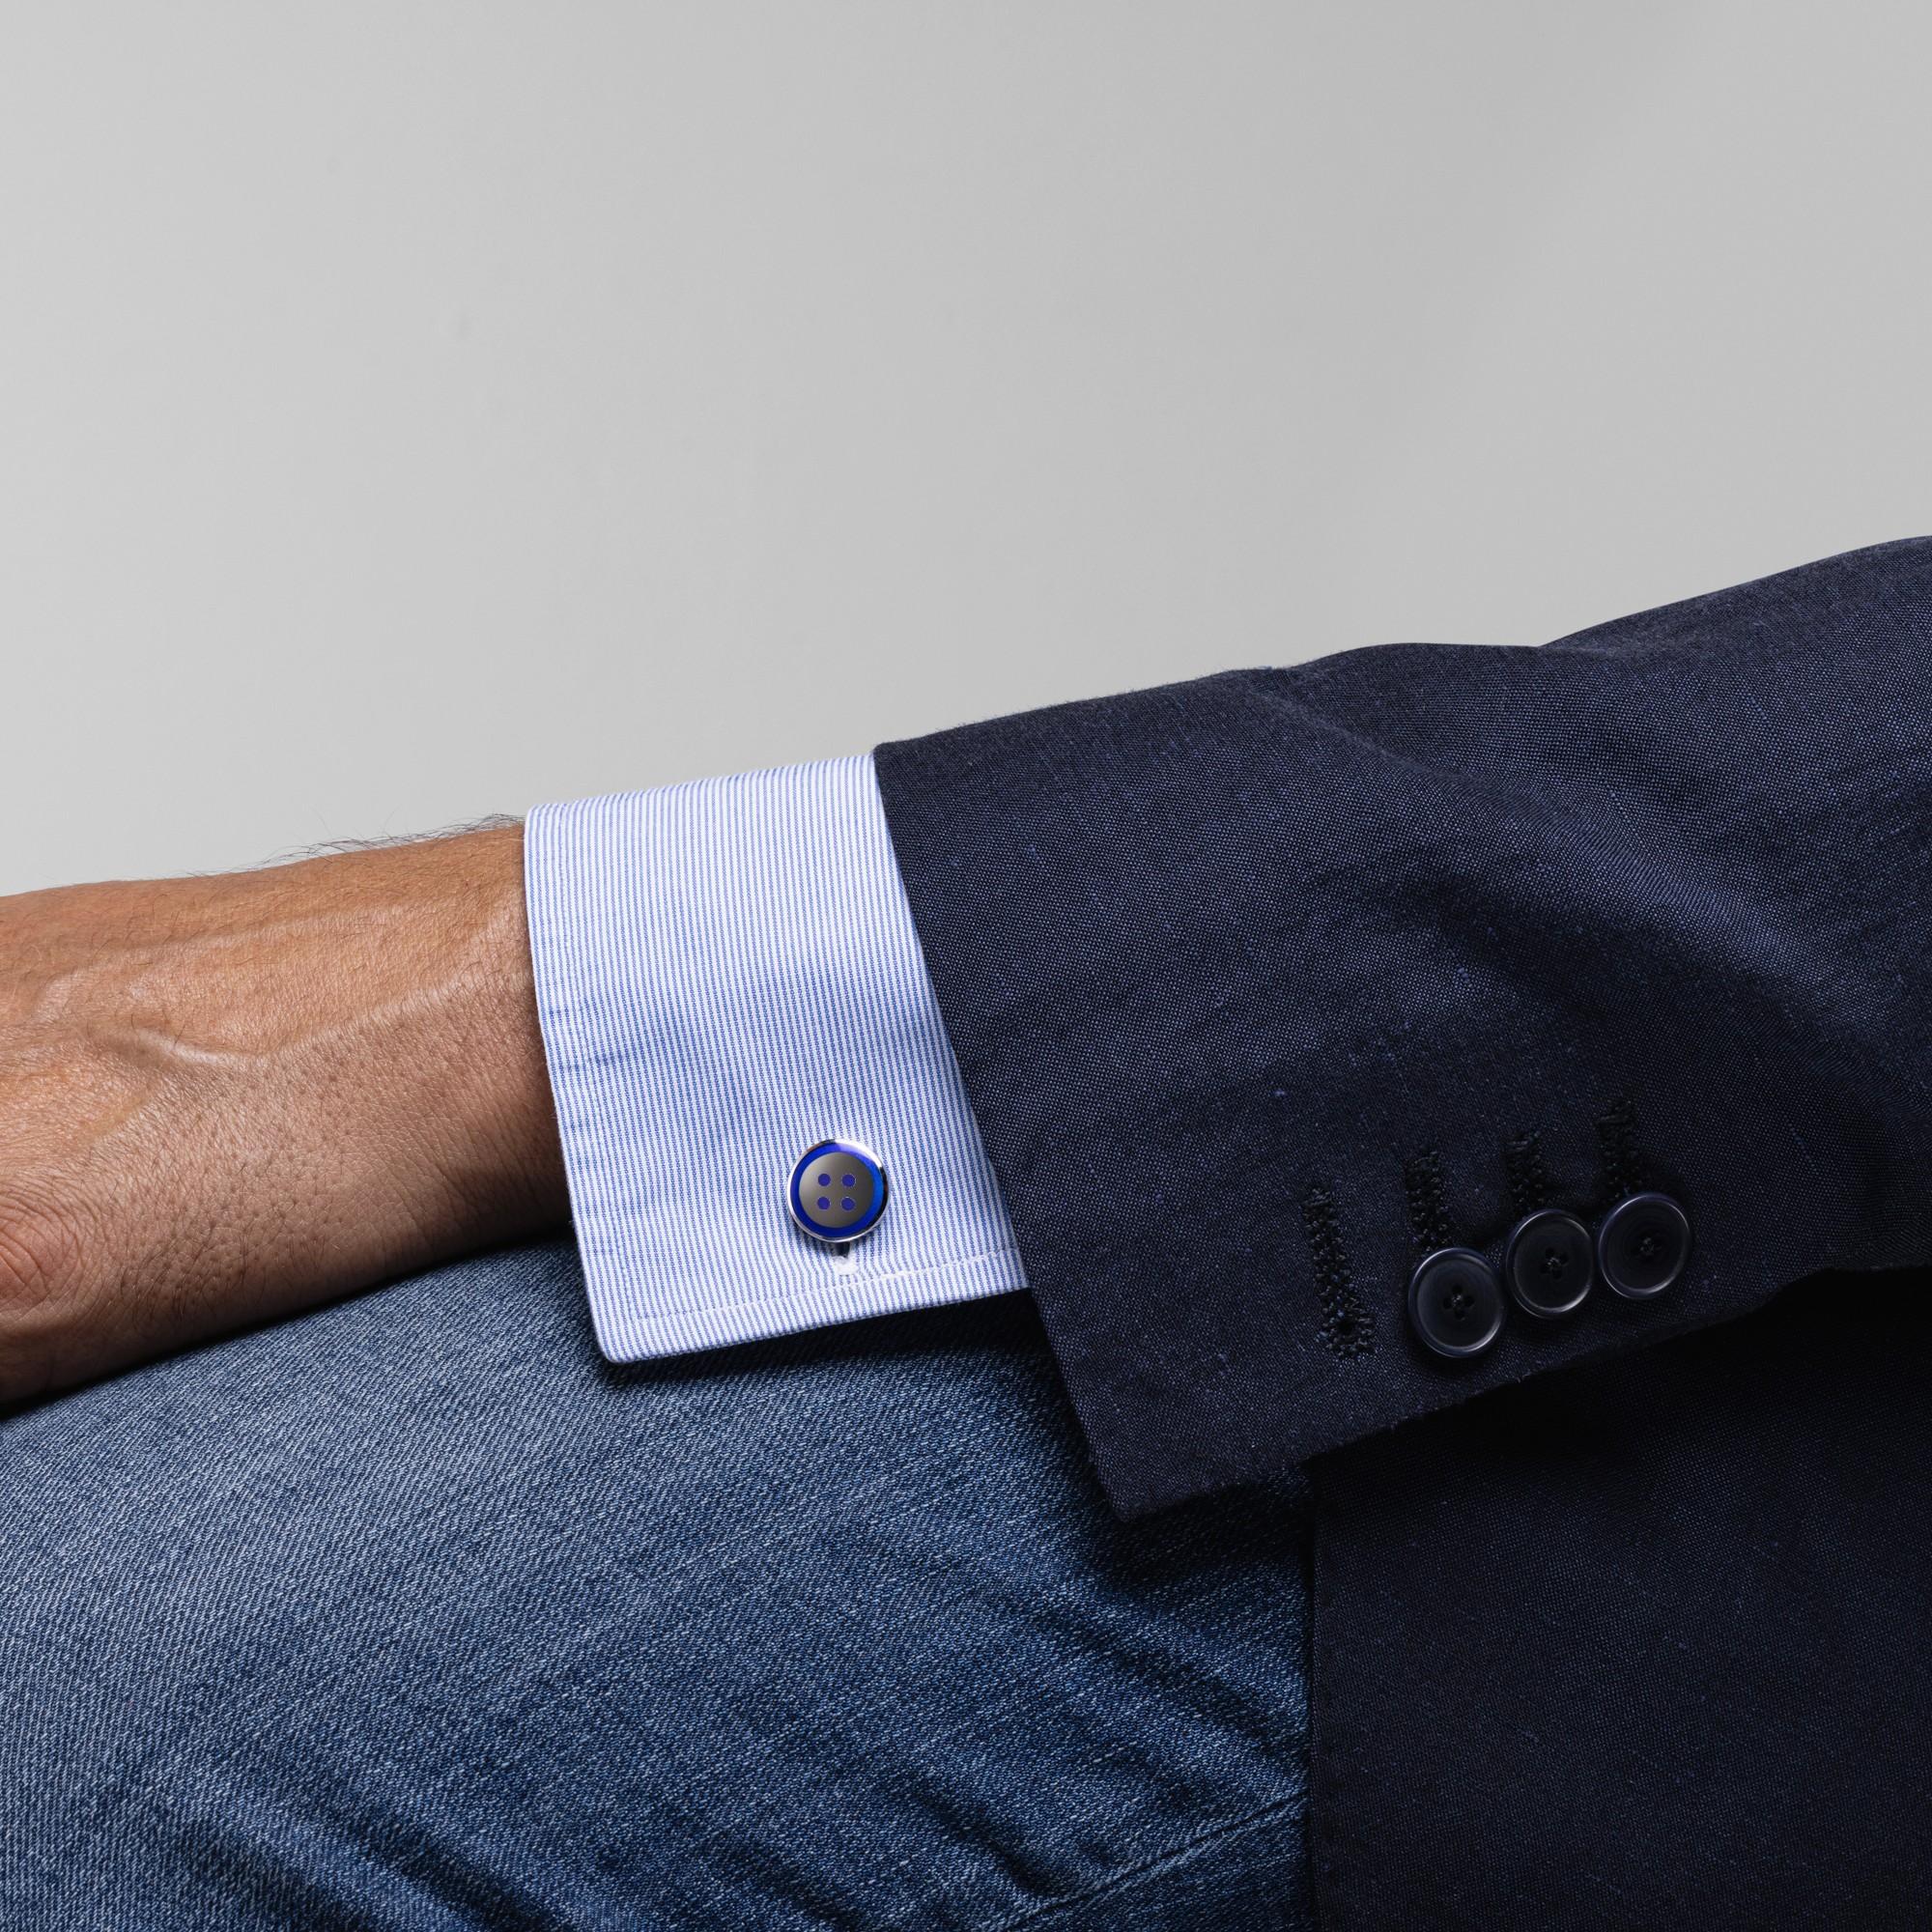 Alex Jona design collection, hand crafted in Italy, rhodium plated Sterling Silver cufflinks blue enamel shape button. These cufflinks feature a T-Bar fastening, aiding in easy use and confidence that they'll stay secured to your shirt.

Alex Jona